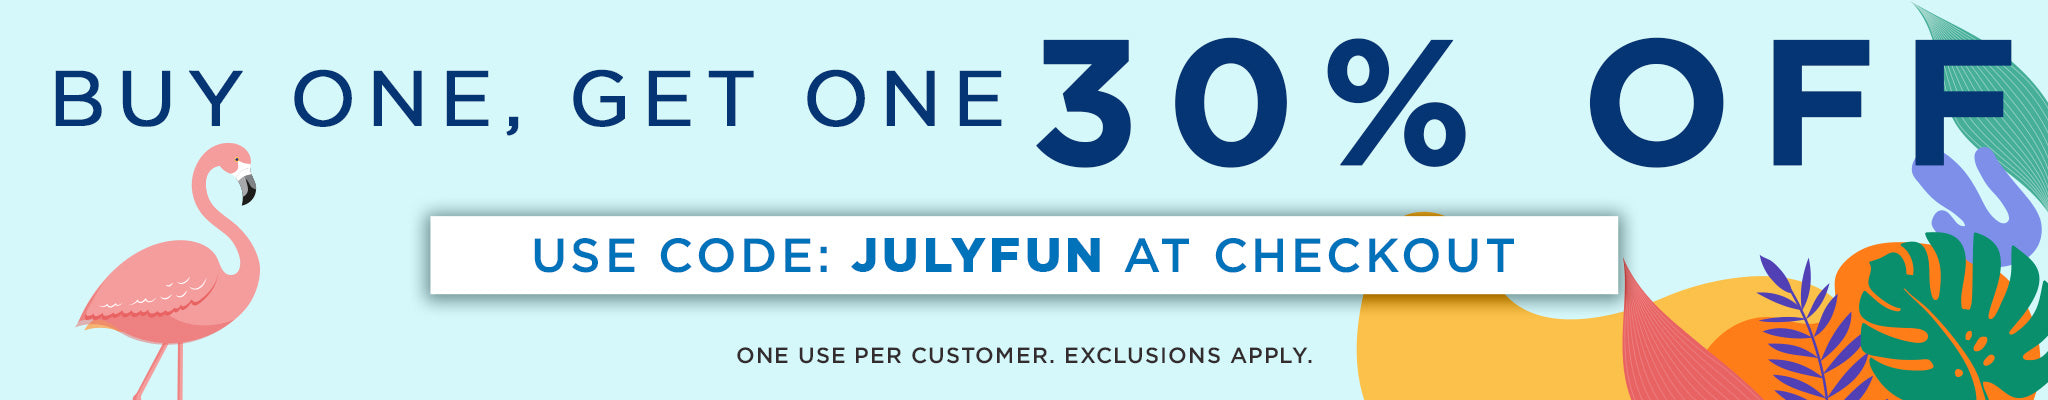 Buy One, Get One 30% OFF | Use Code: JULYFUN at checkout | One use per customer. Exclusions apply.